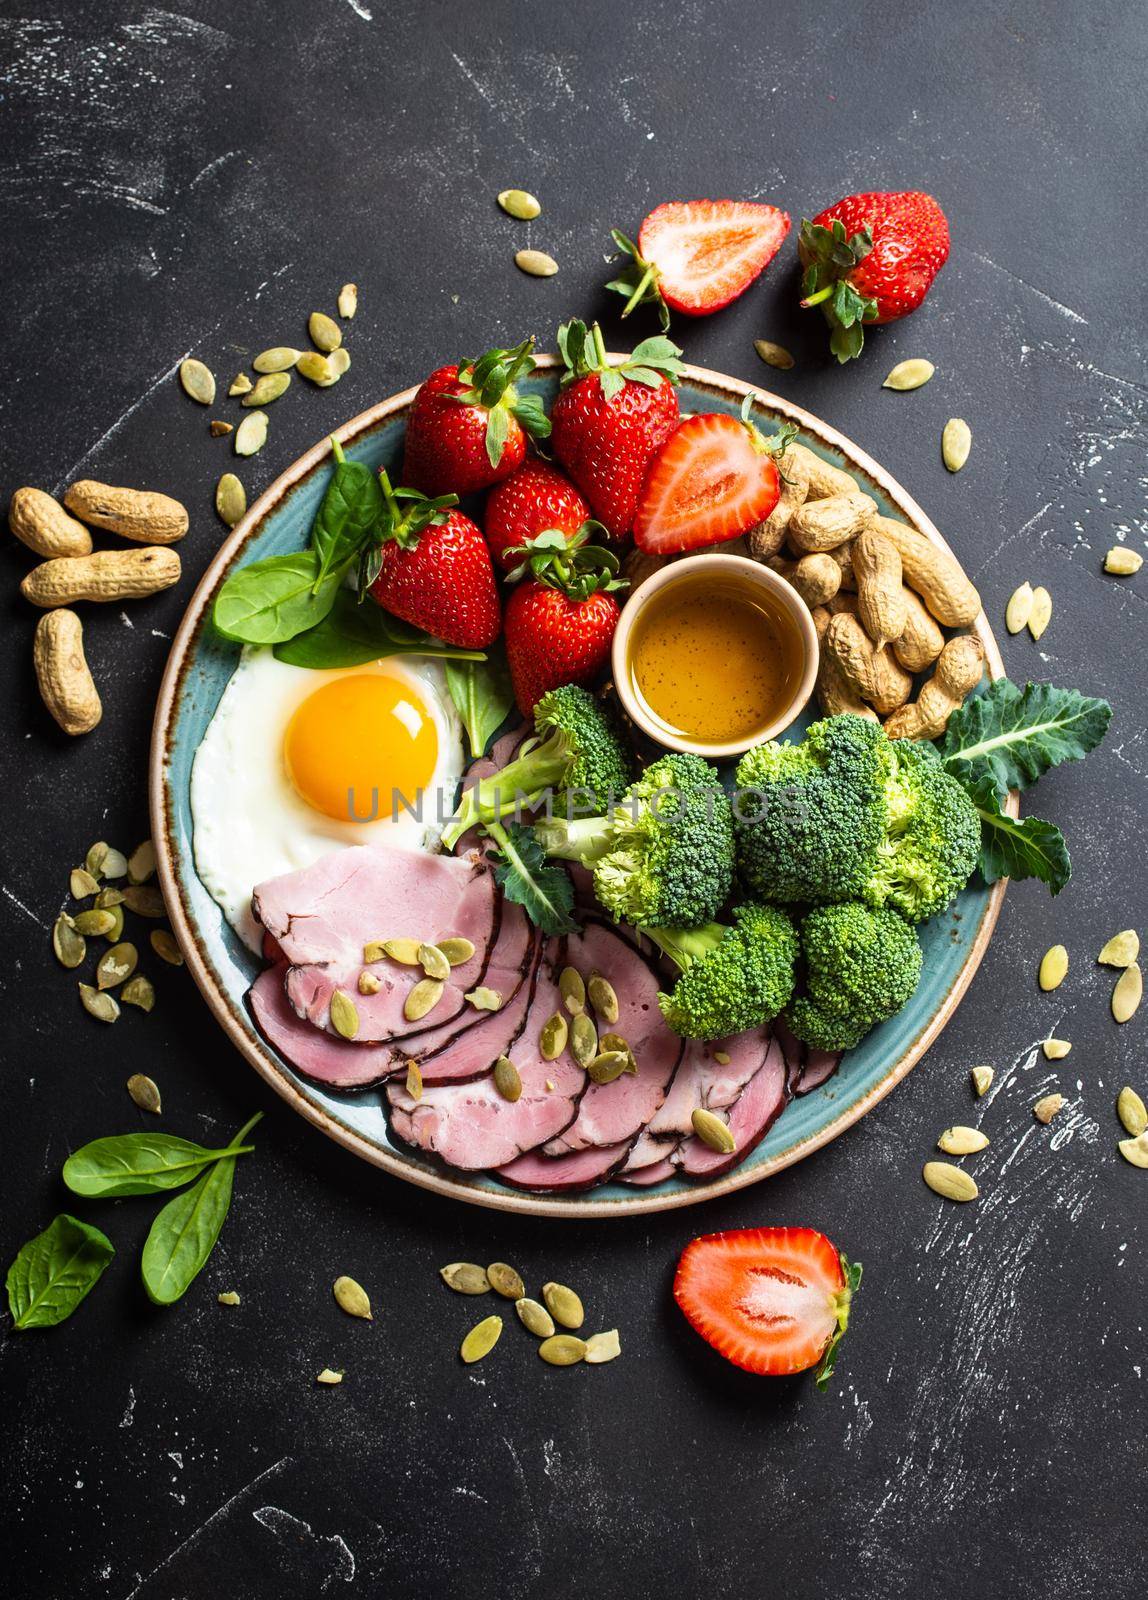 Ketogenic low carbs diet concept, top view. Plate on stone black background with keto foods: egg, meat, olive oil, broccoli, berries, nuts, seeds, spinach. Healthy fats, clean eating for weight lossdietdi